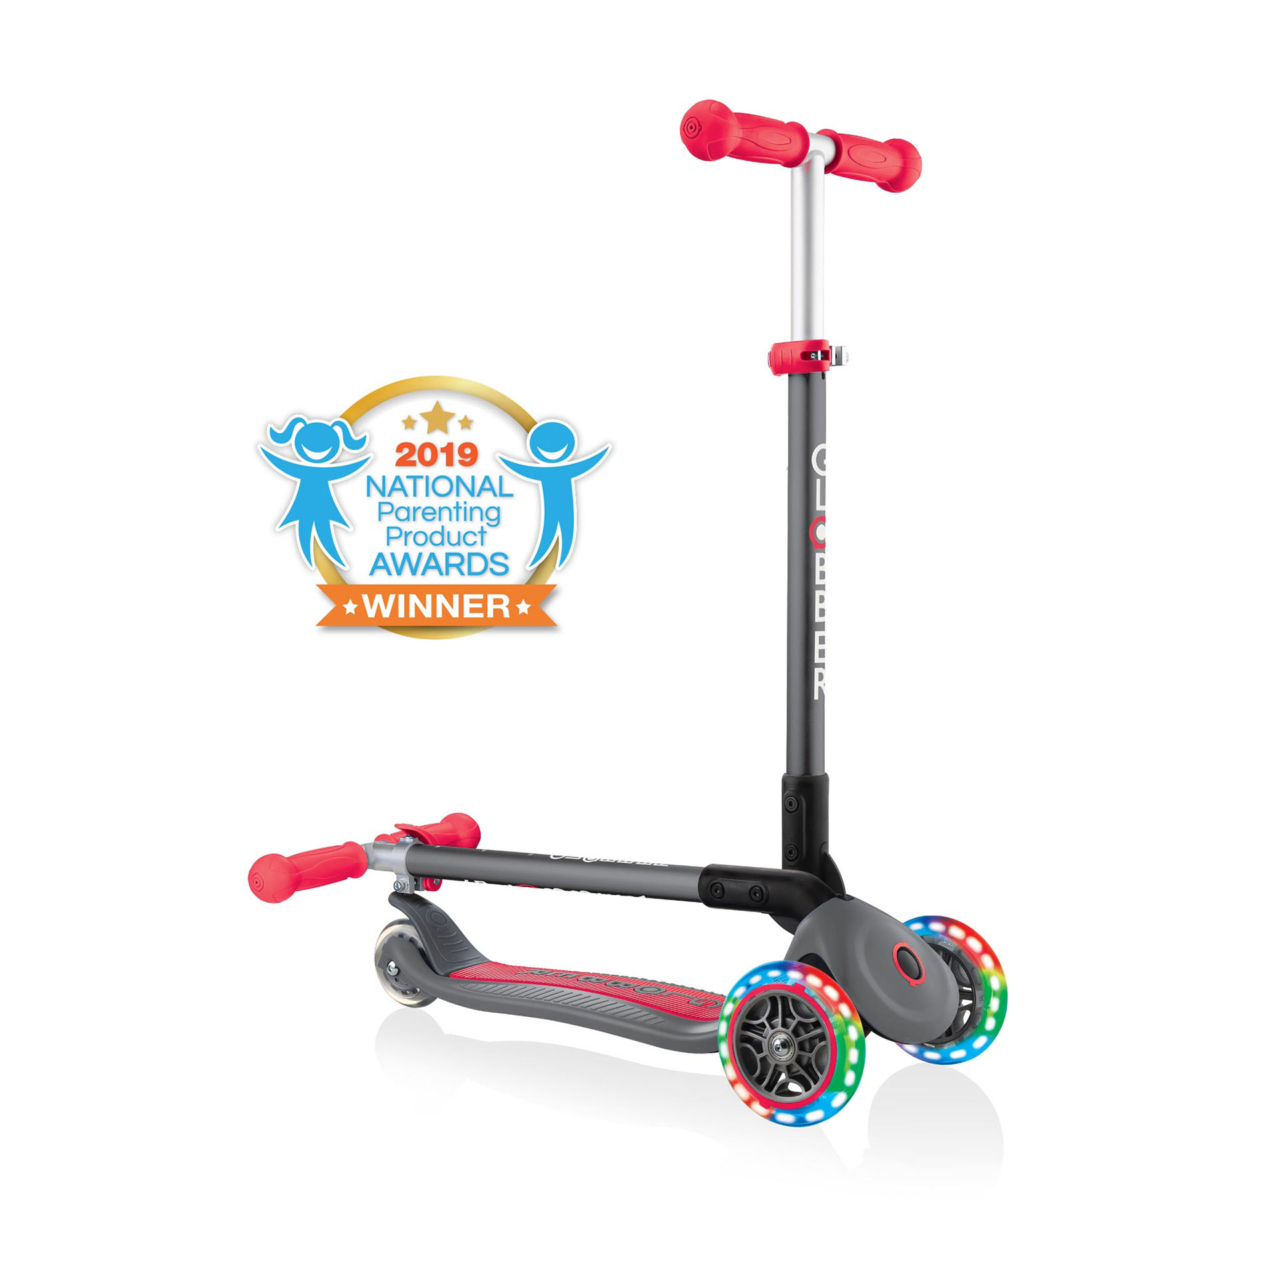 432 120 2 3 Wheel Folding Scooter With Lights